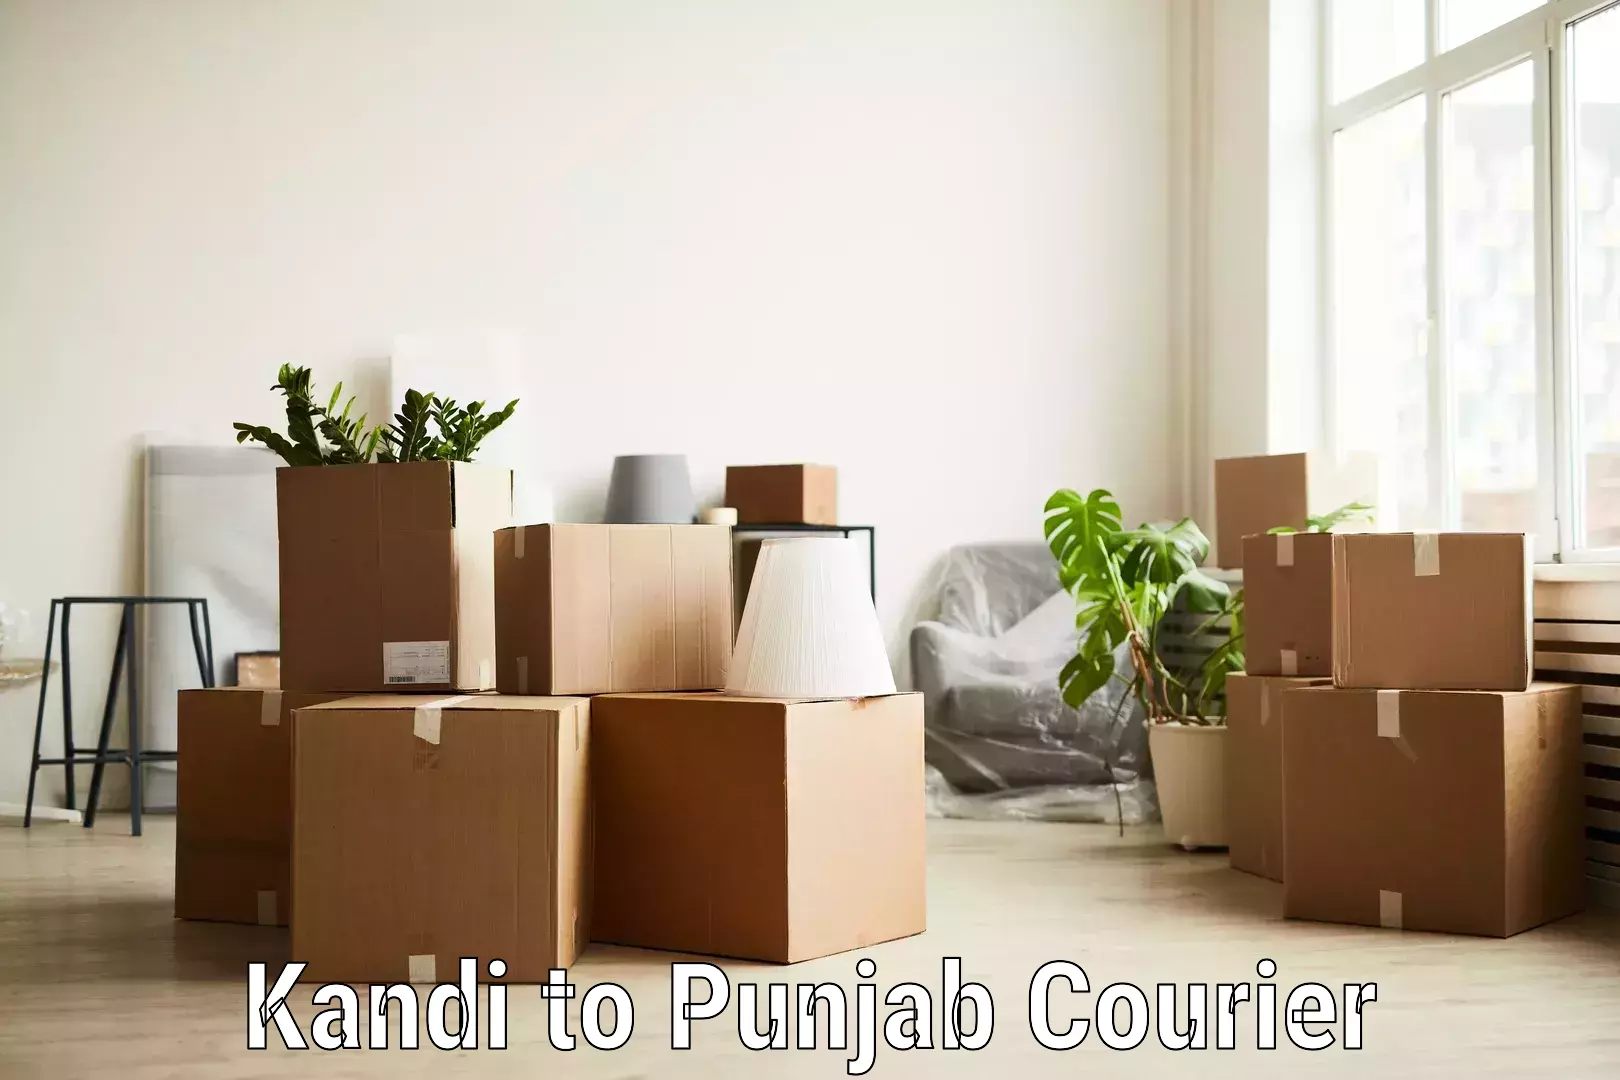 24-hour courier services Kandi to Faridkot